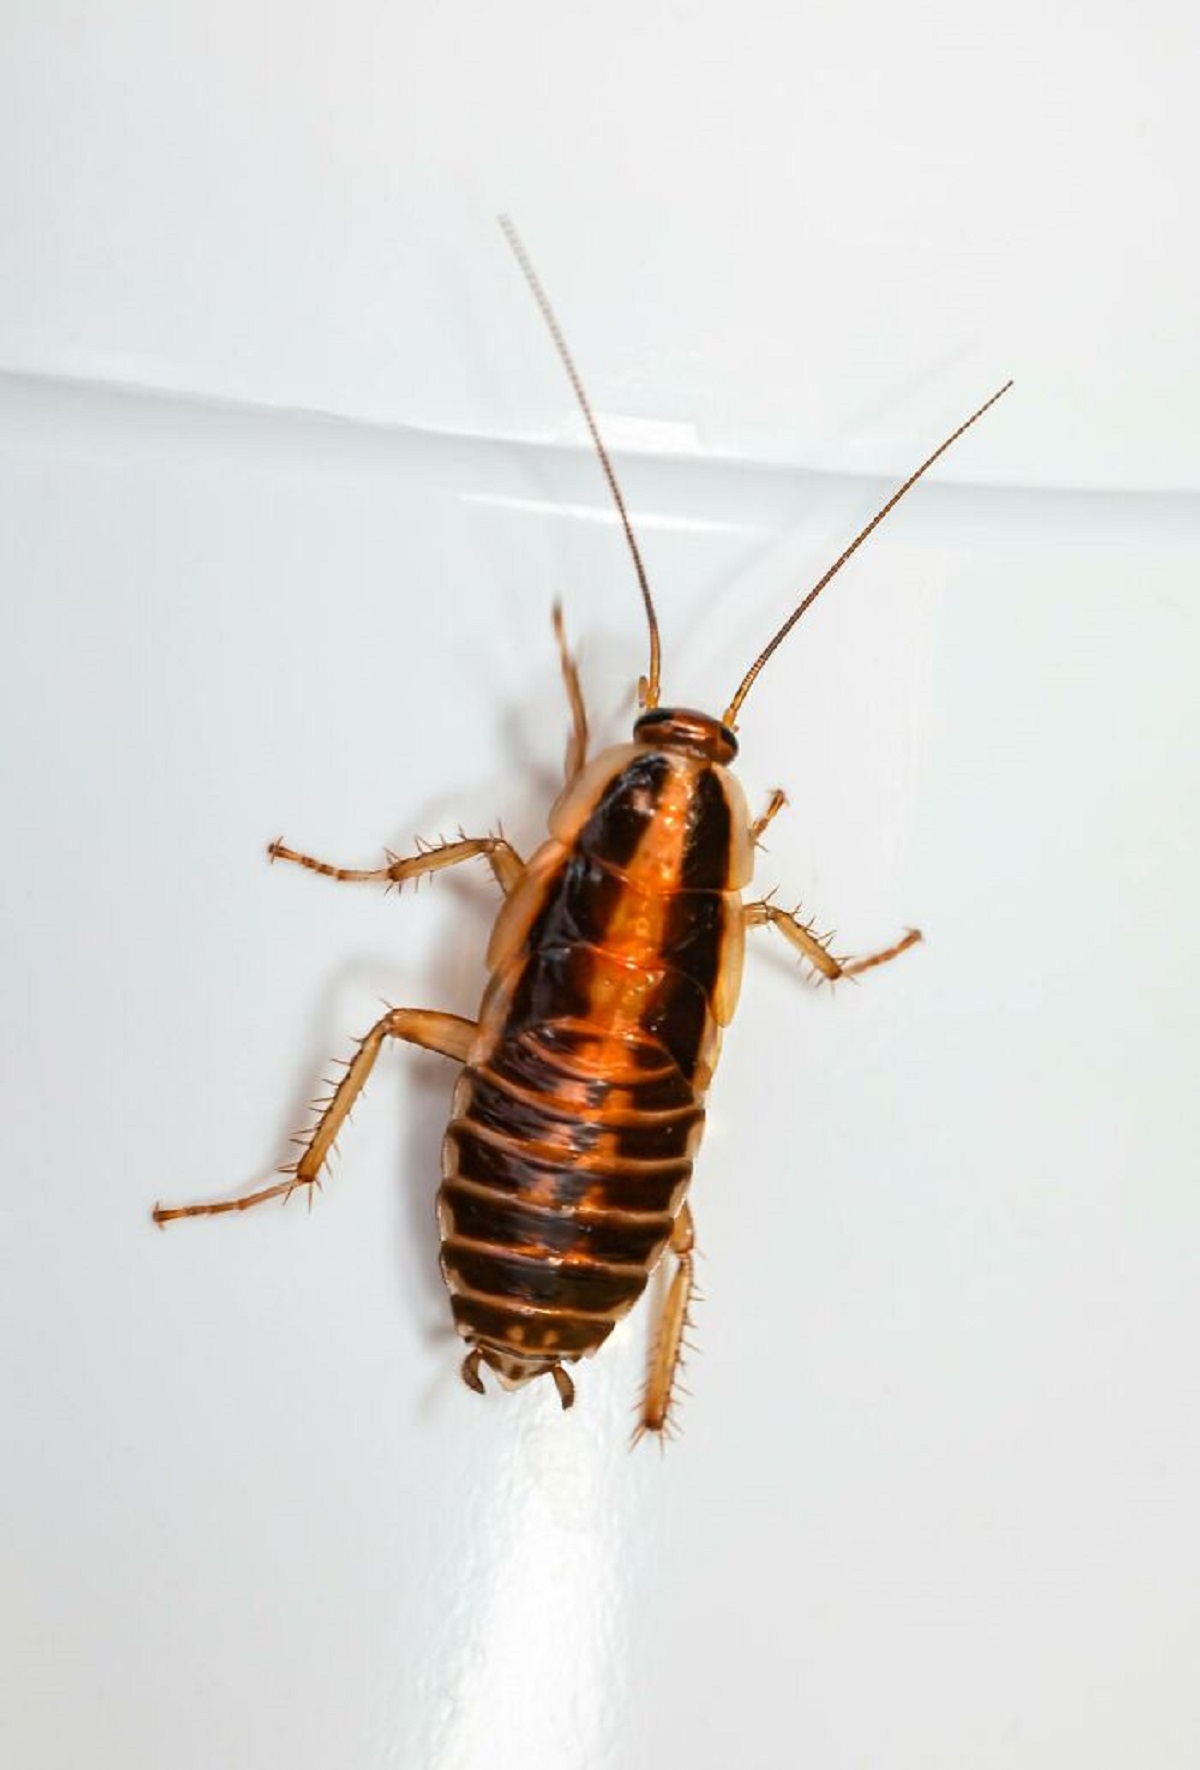 A cockroach can live up to 168 hours without its head.